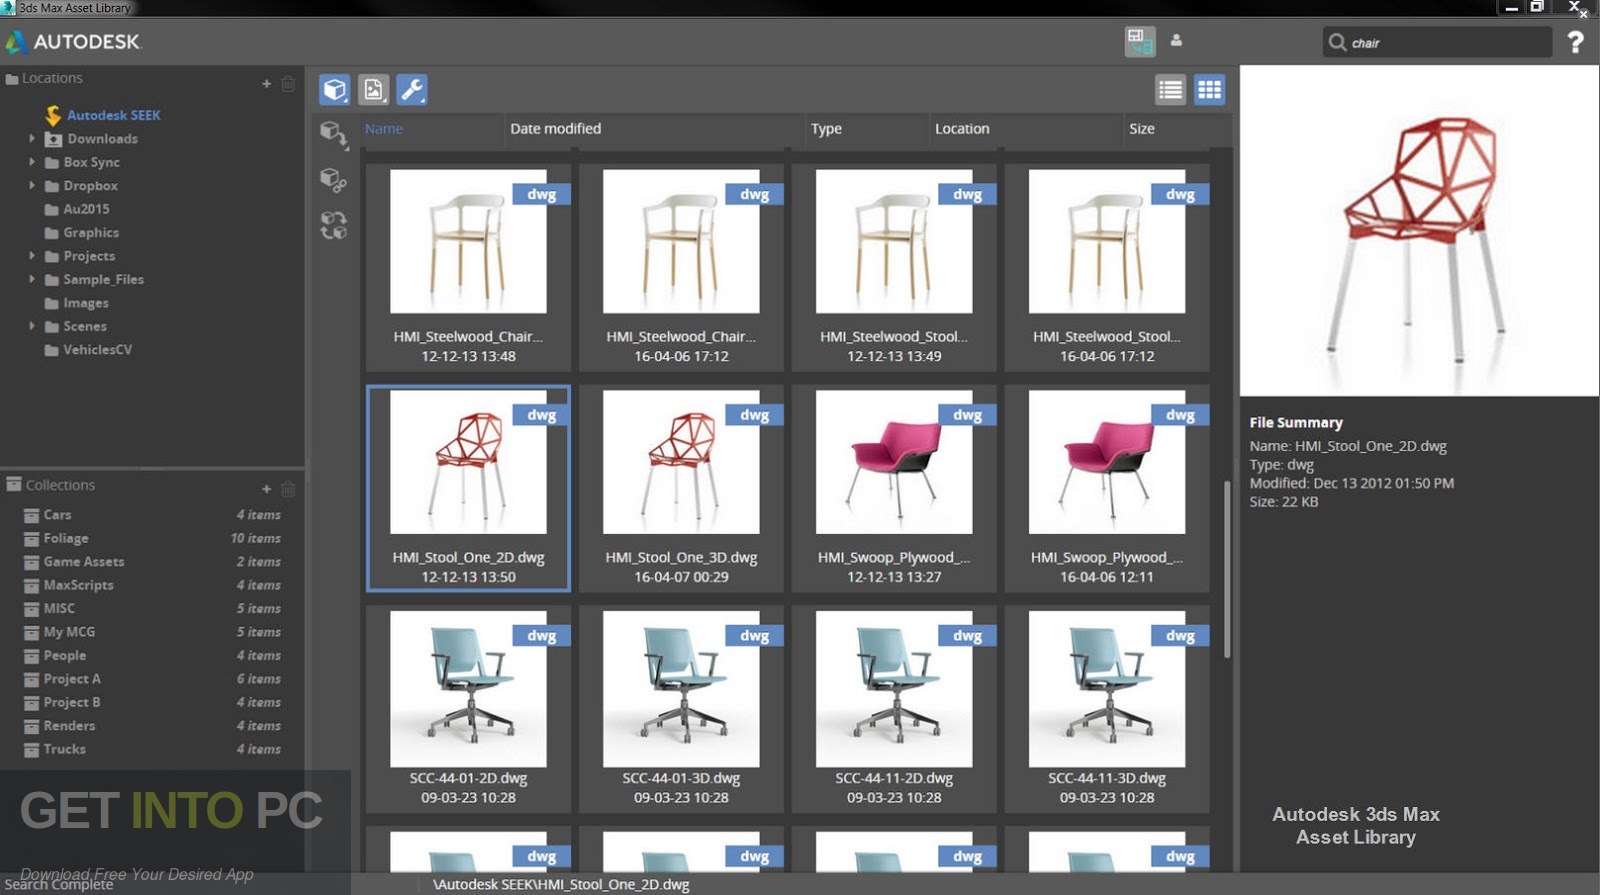 Autodesk 3ds Max 2009 Plugins Collections Latest Version Download-GetintoPC.com